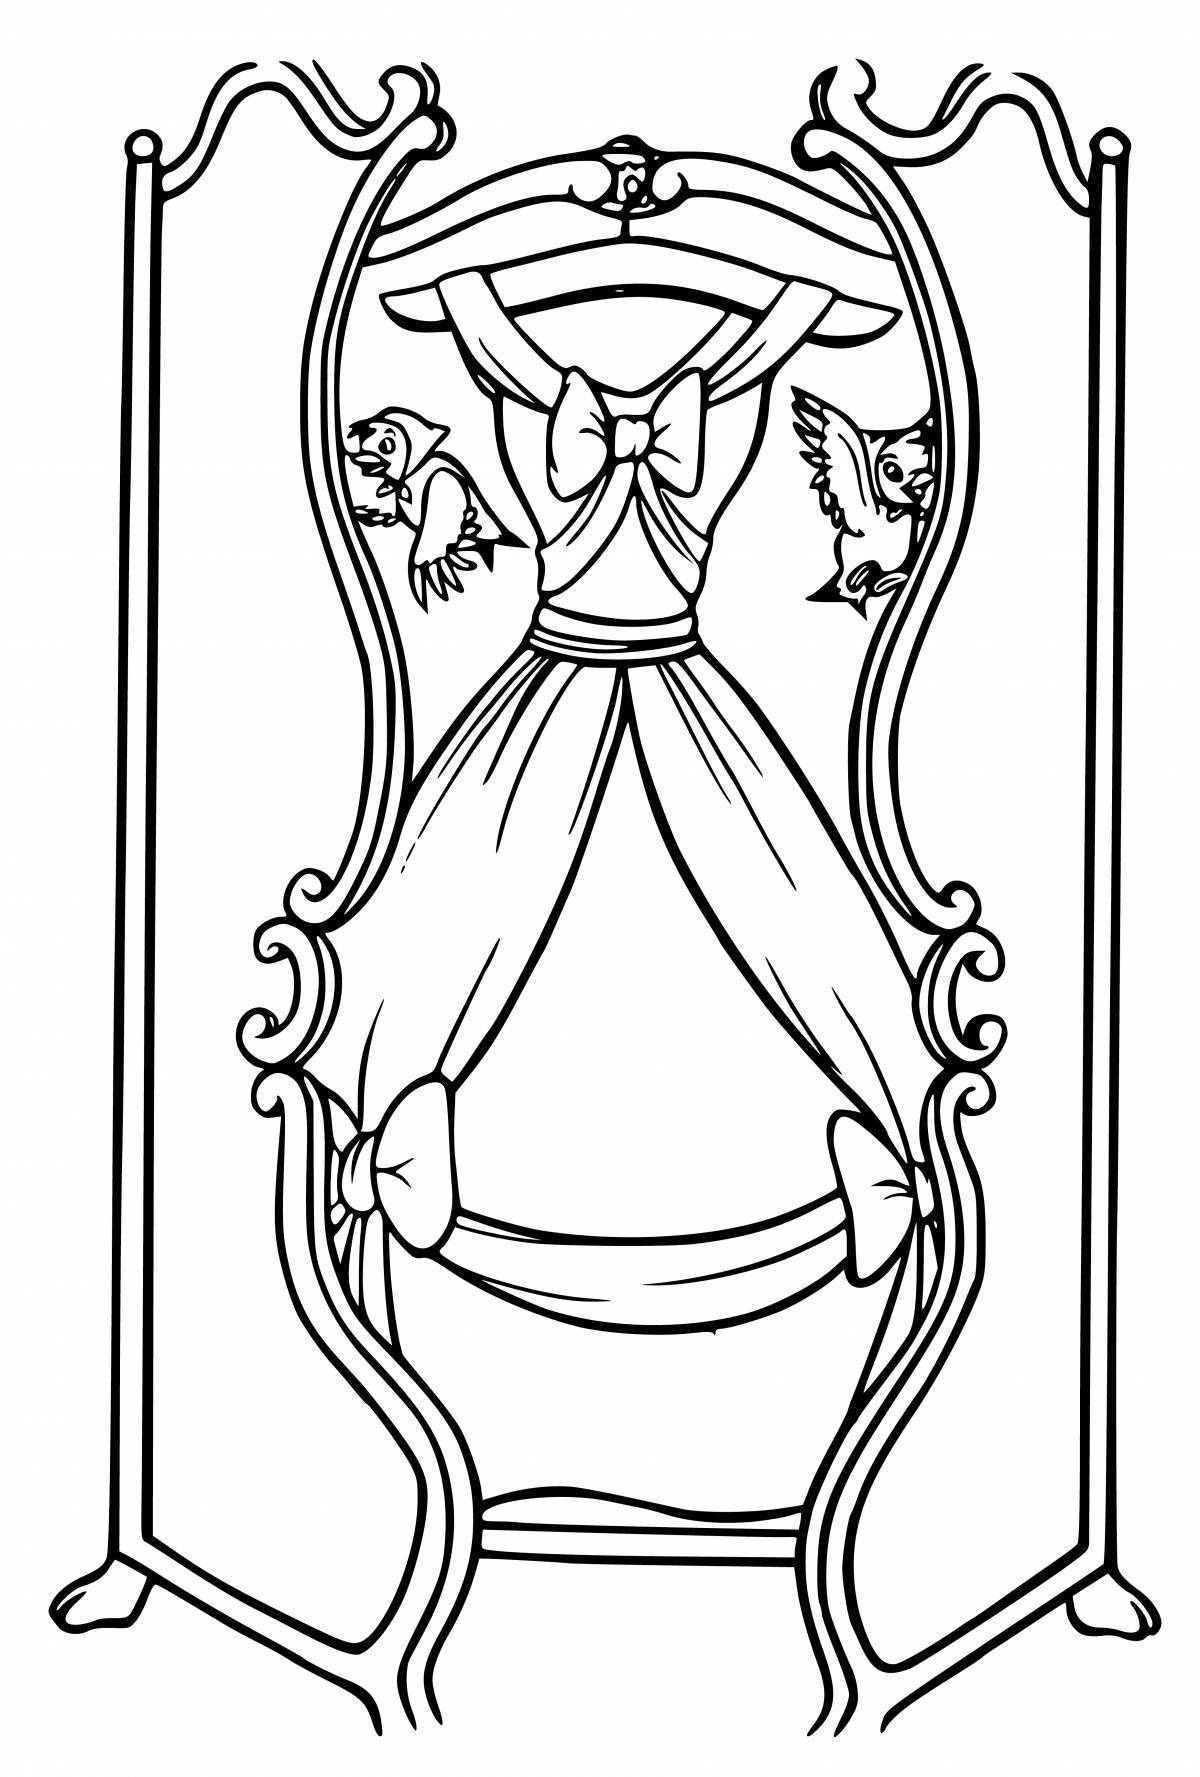 Amazing wardrobe coloring page for kids